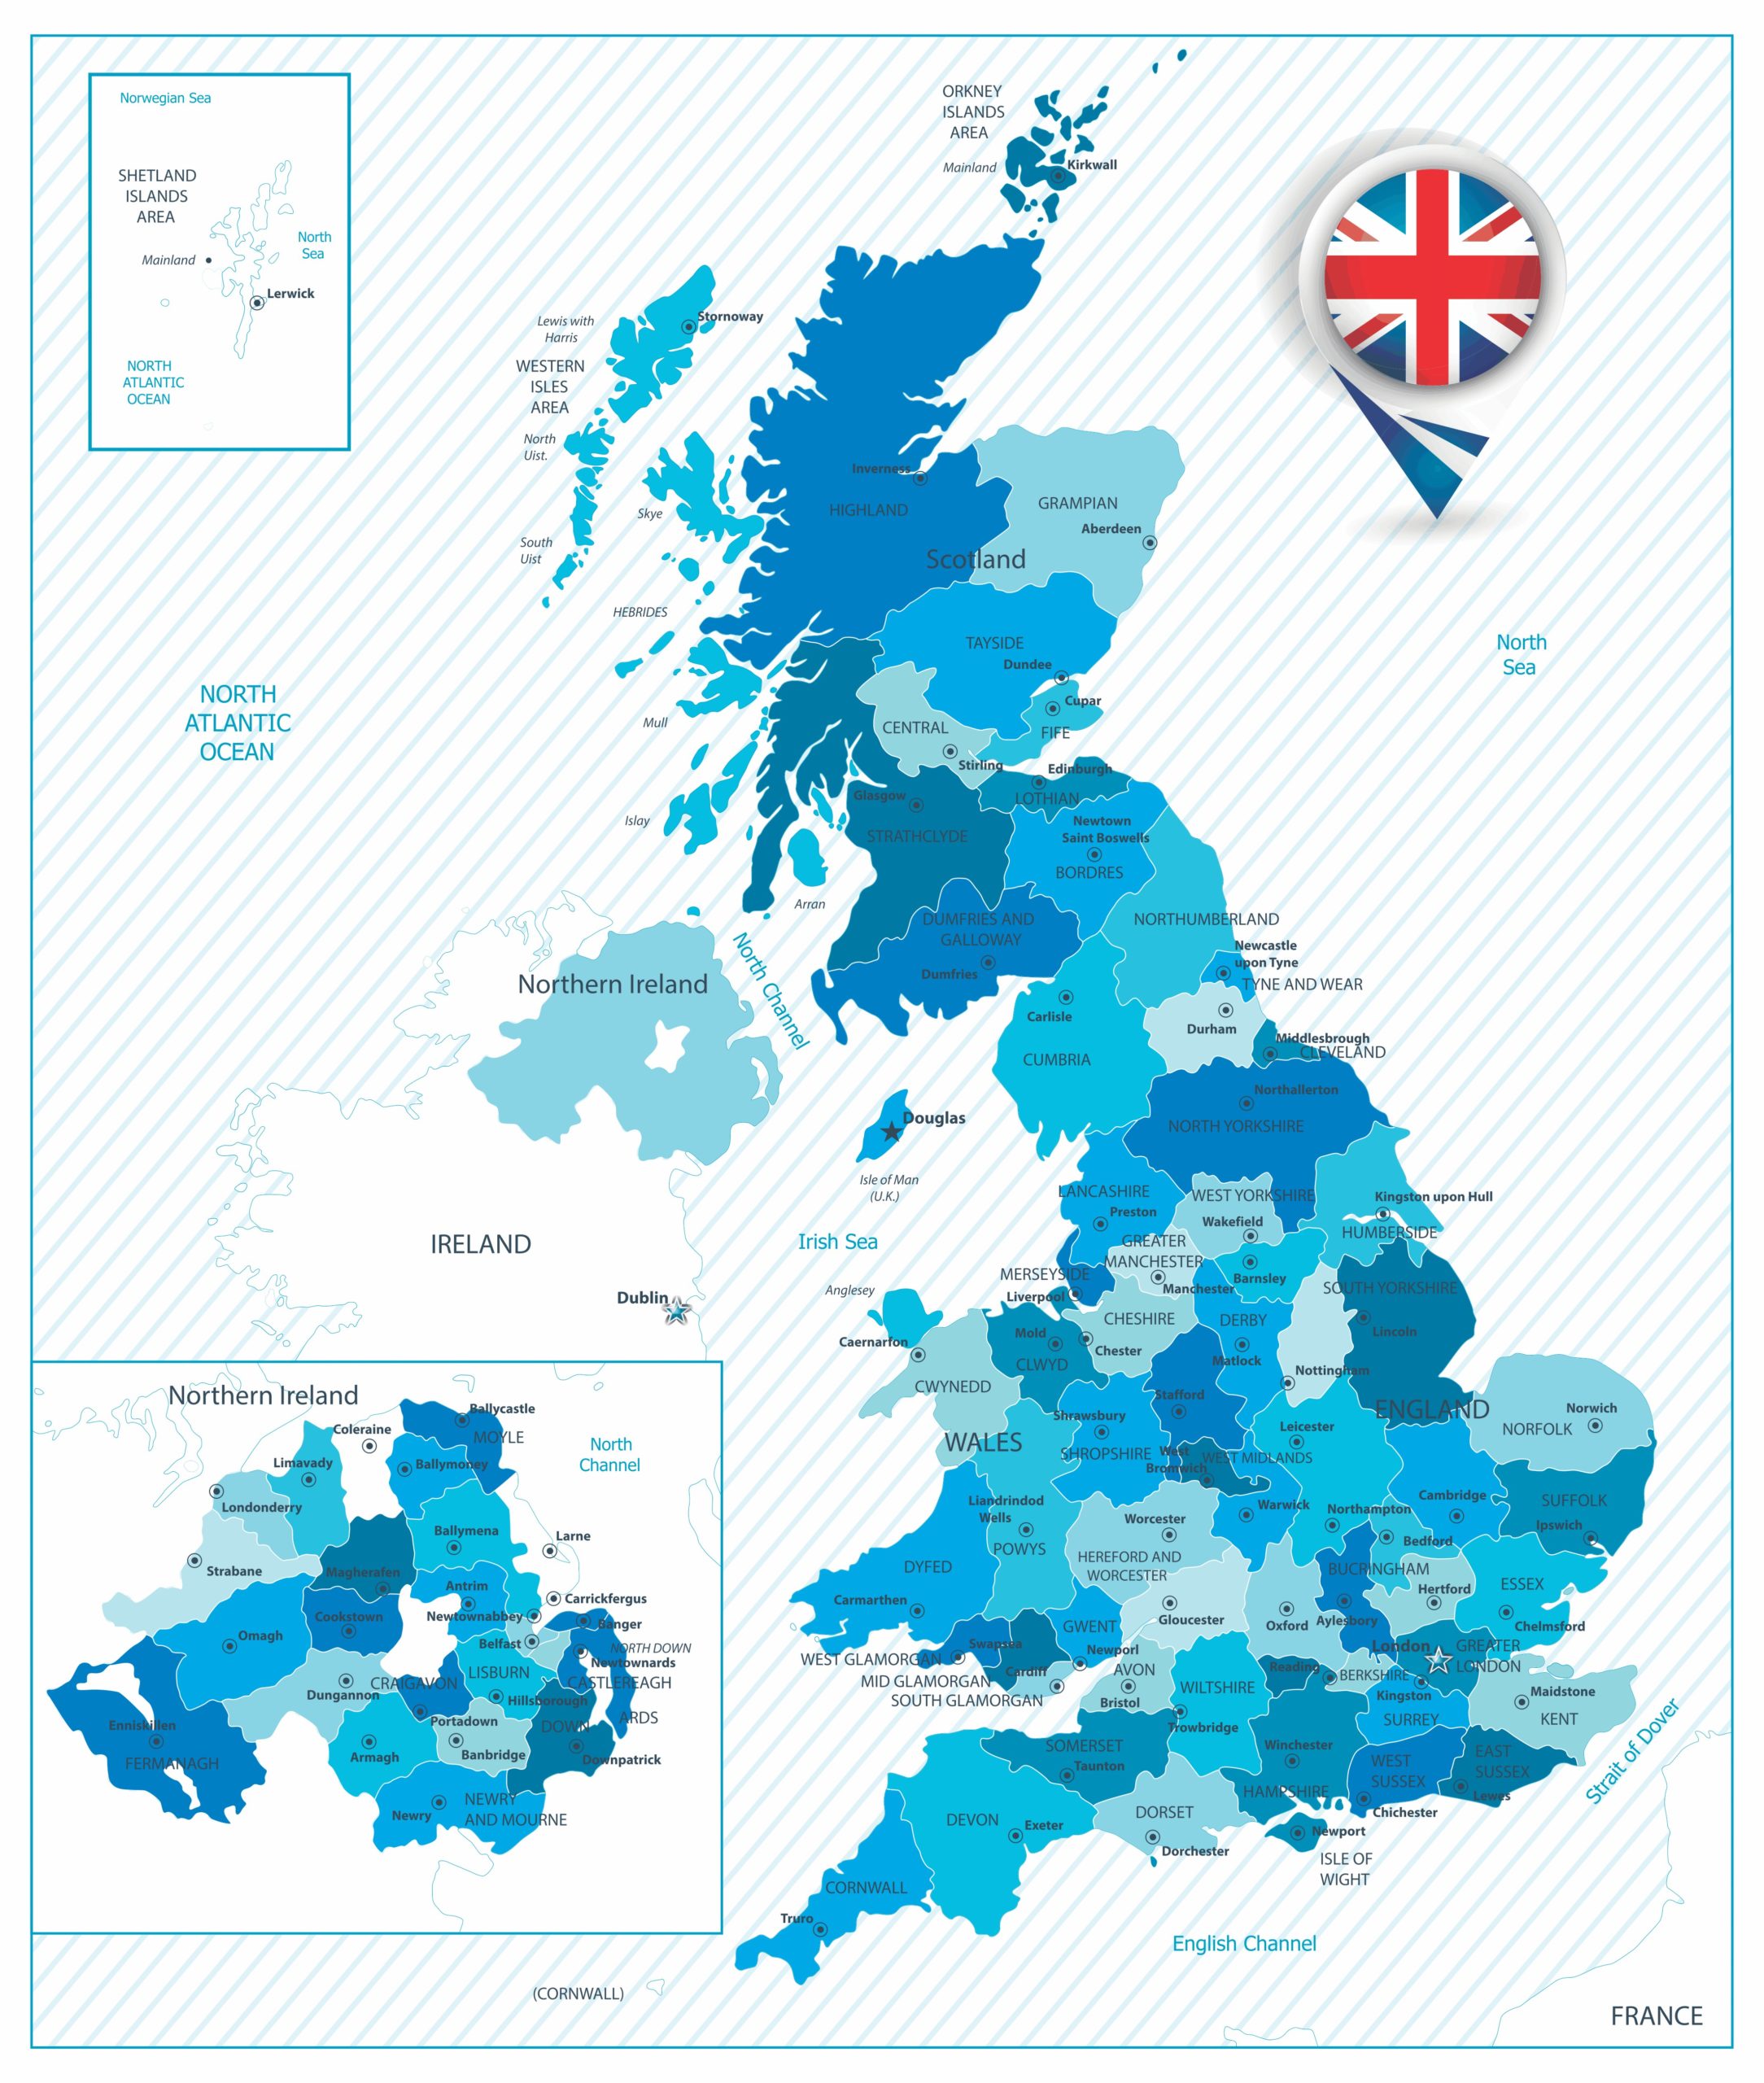 List Of UK LinkedIn Locations By Region [Updated 2018]